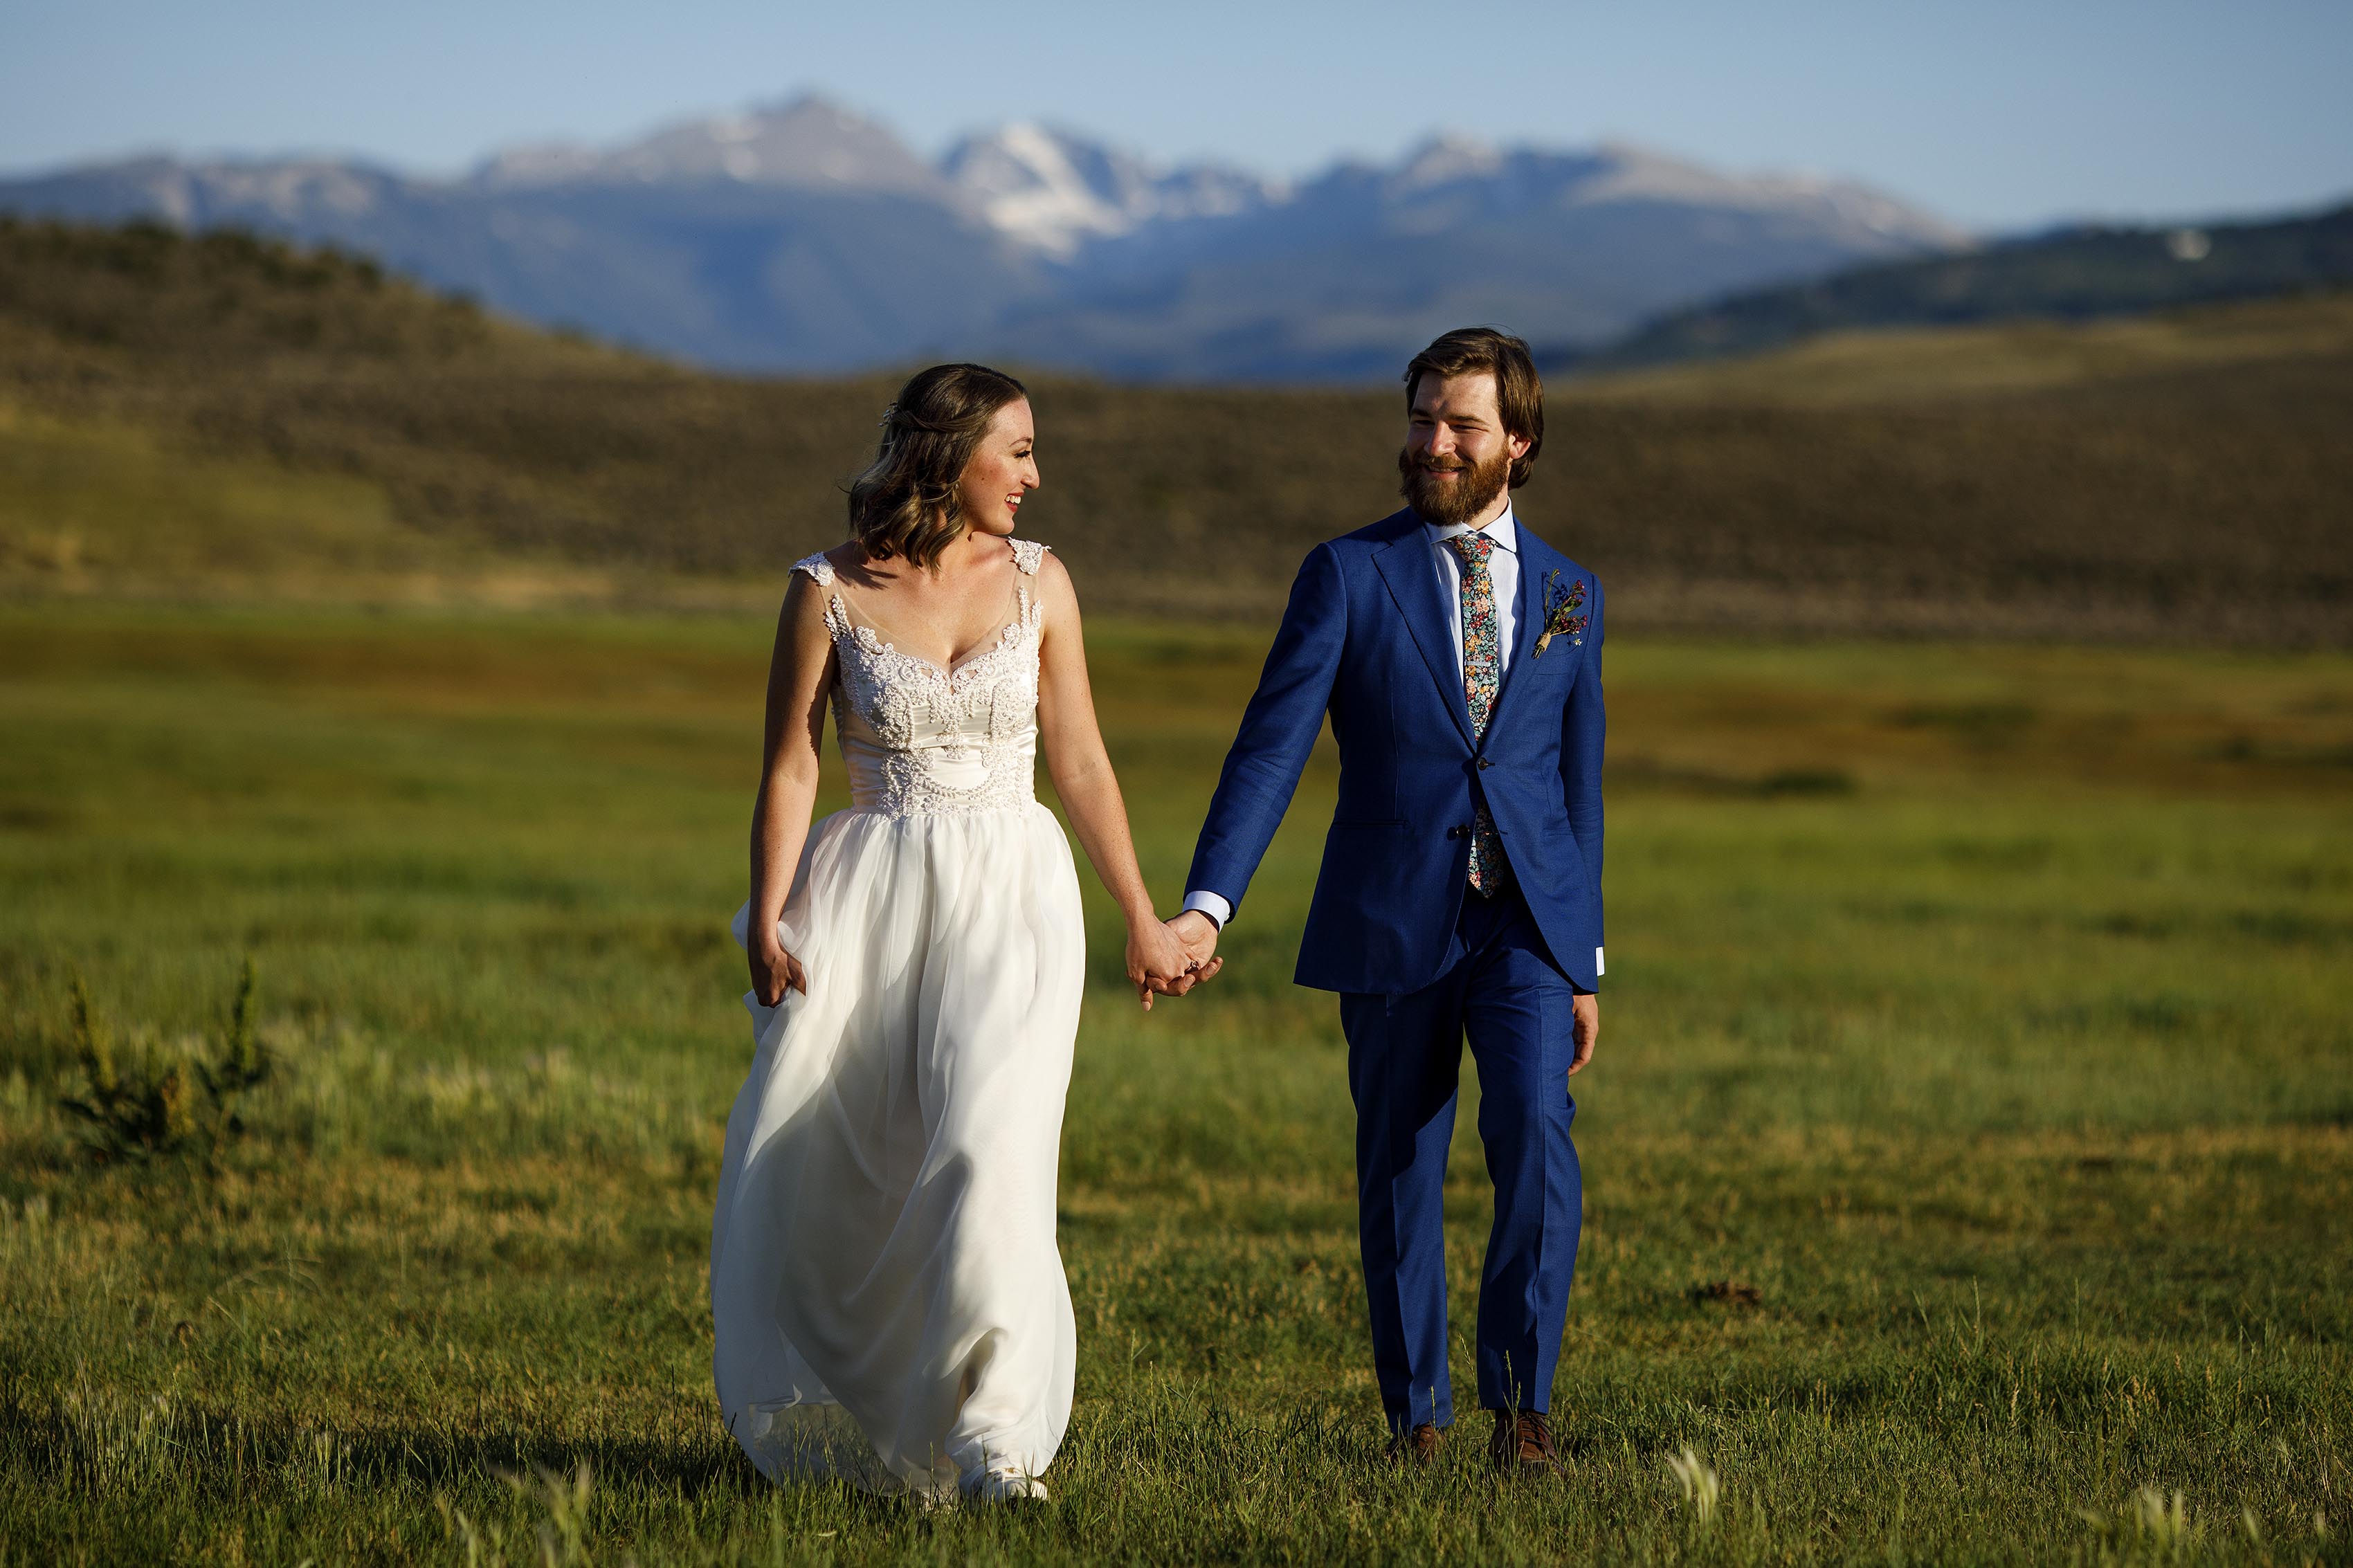 The newlyweds walk through a field in Wolcott, CO at 4 Eagle Ranch during their wedding day